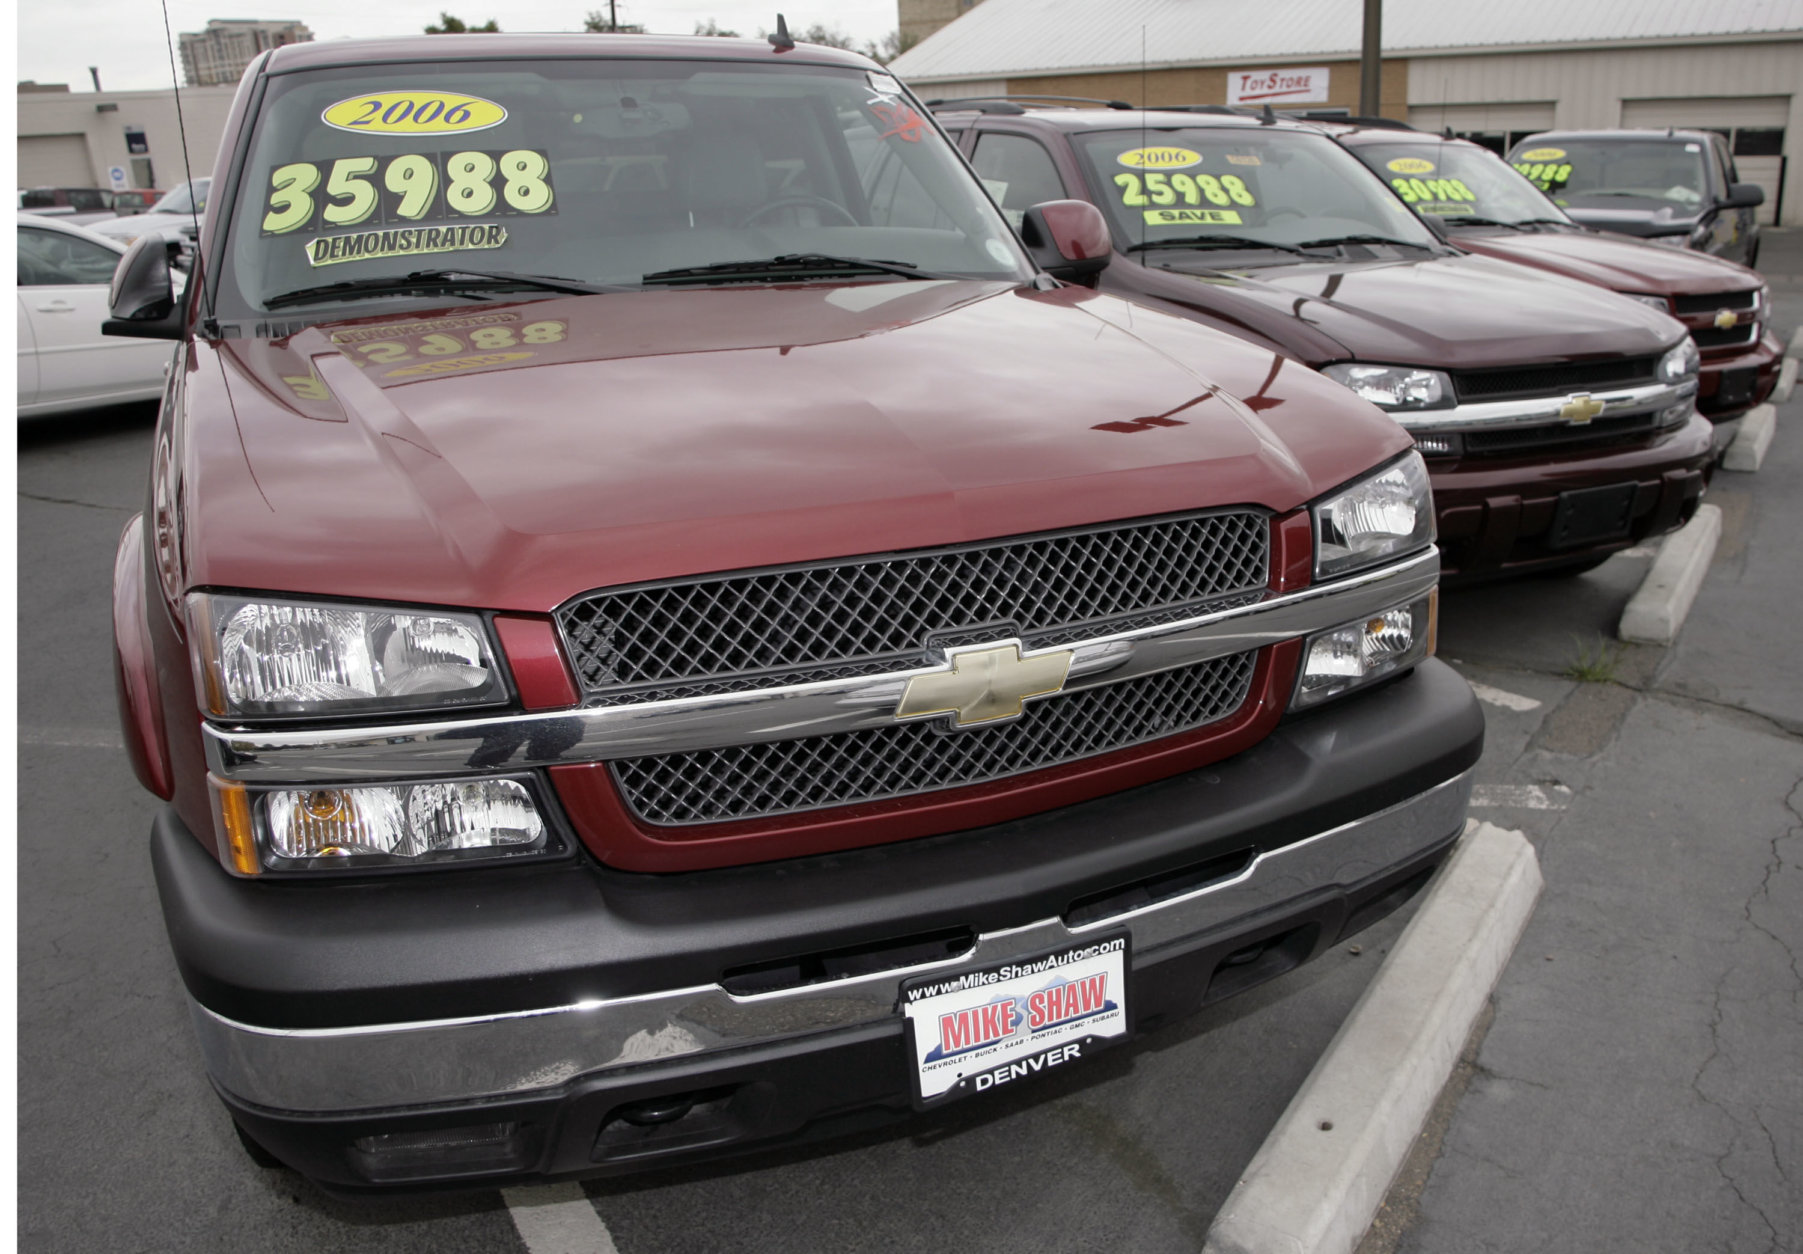 The Chevrolet pckup truck is No. 4 in most stolen vehicles overall. An unsold 2006 Chevrolet pickup truck sits next to a Trailblazer and Avalanche pickup truck on the lot at a dealership in Denver on Sunday, Oct. 8, 2006. Retail sales fell in September by the largest amount in three months, although the weakness primarily reflected a big drop in gasoline prices which actually helped to boost spending in other categories. (AP Photo/David Zalubowski)